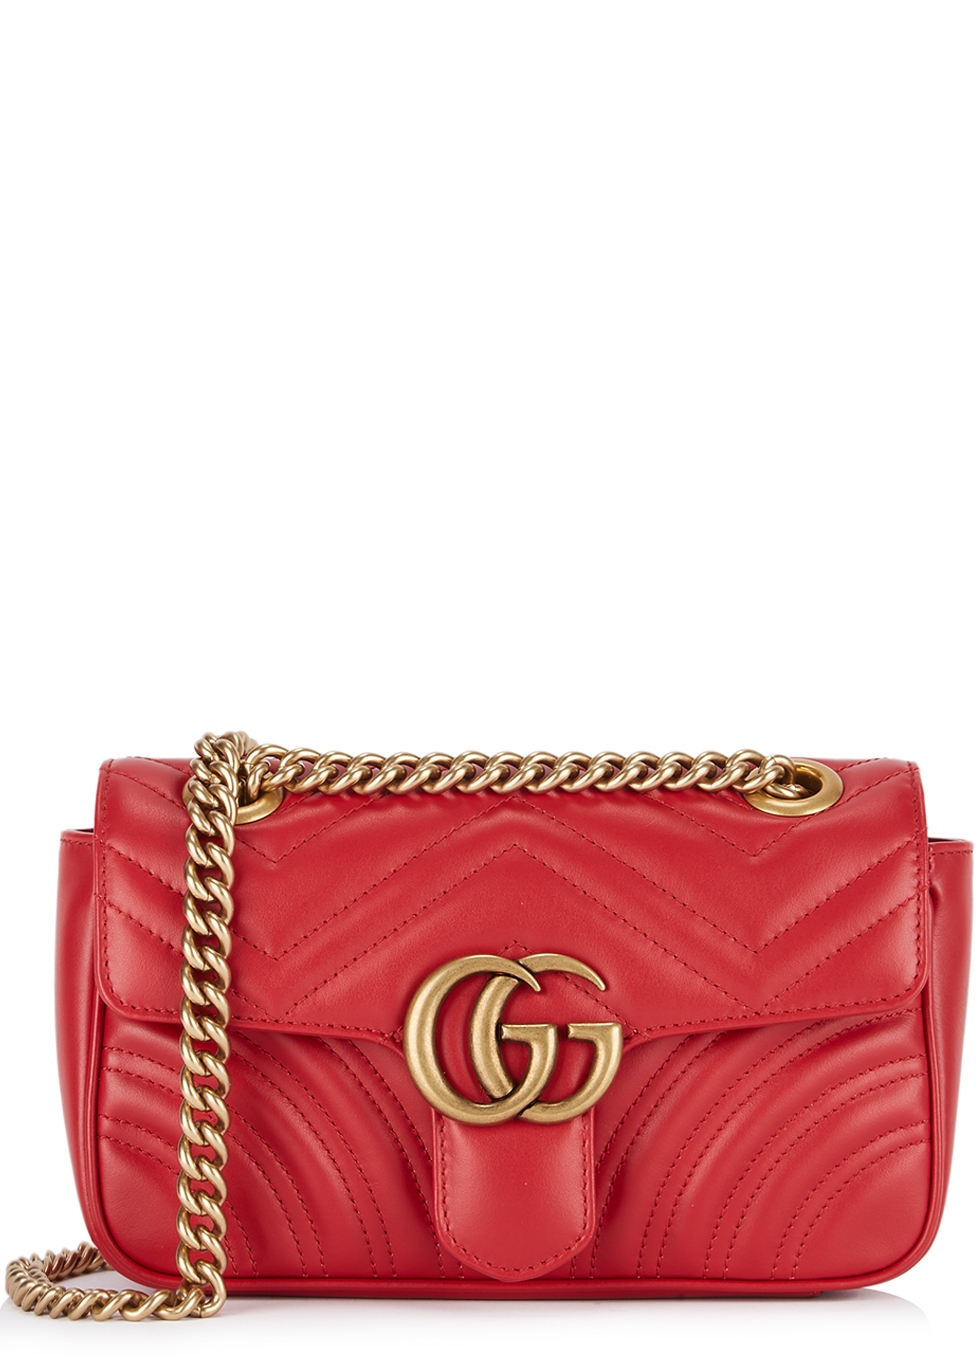 red leather gucci bag